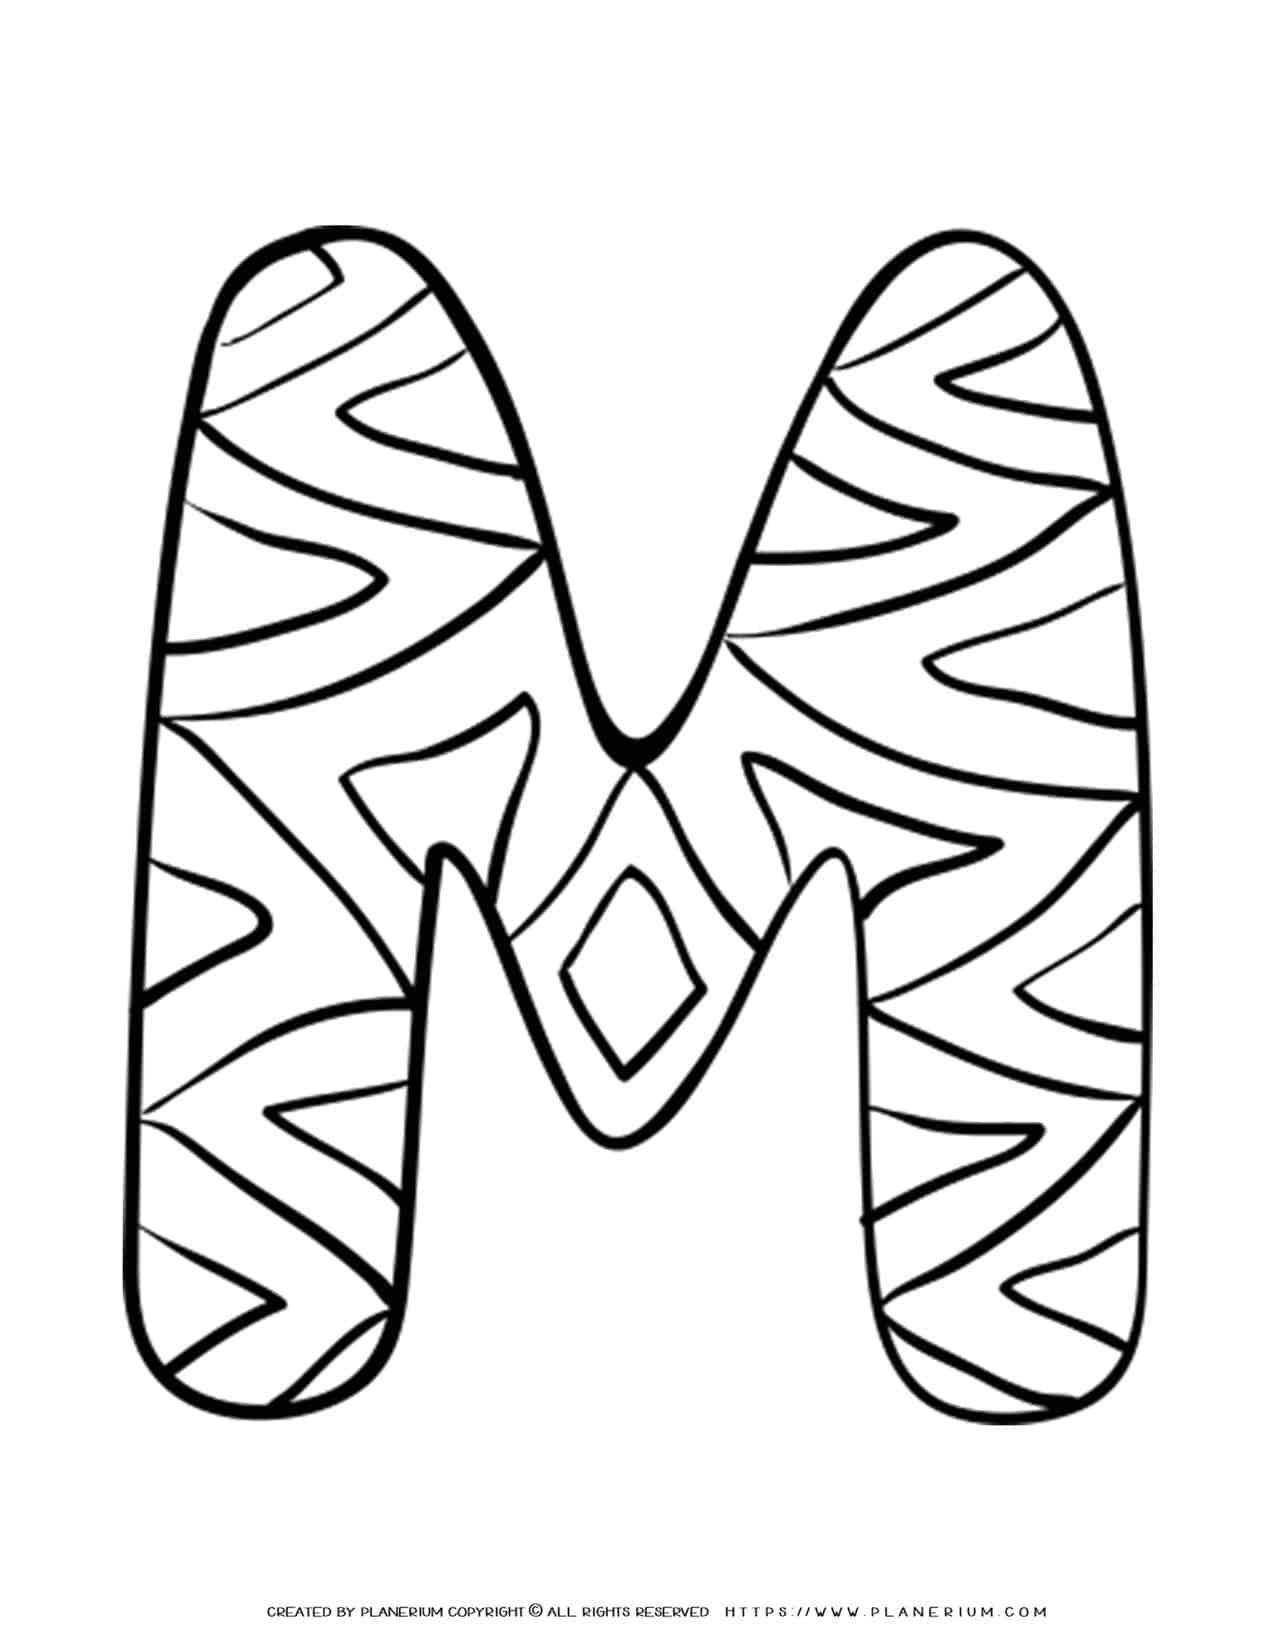 English Alphabet - Capital M with Pattern - Coloring Page | Planerium